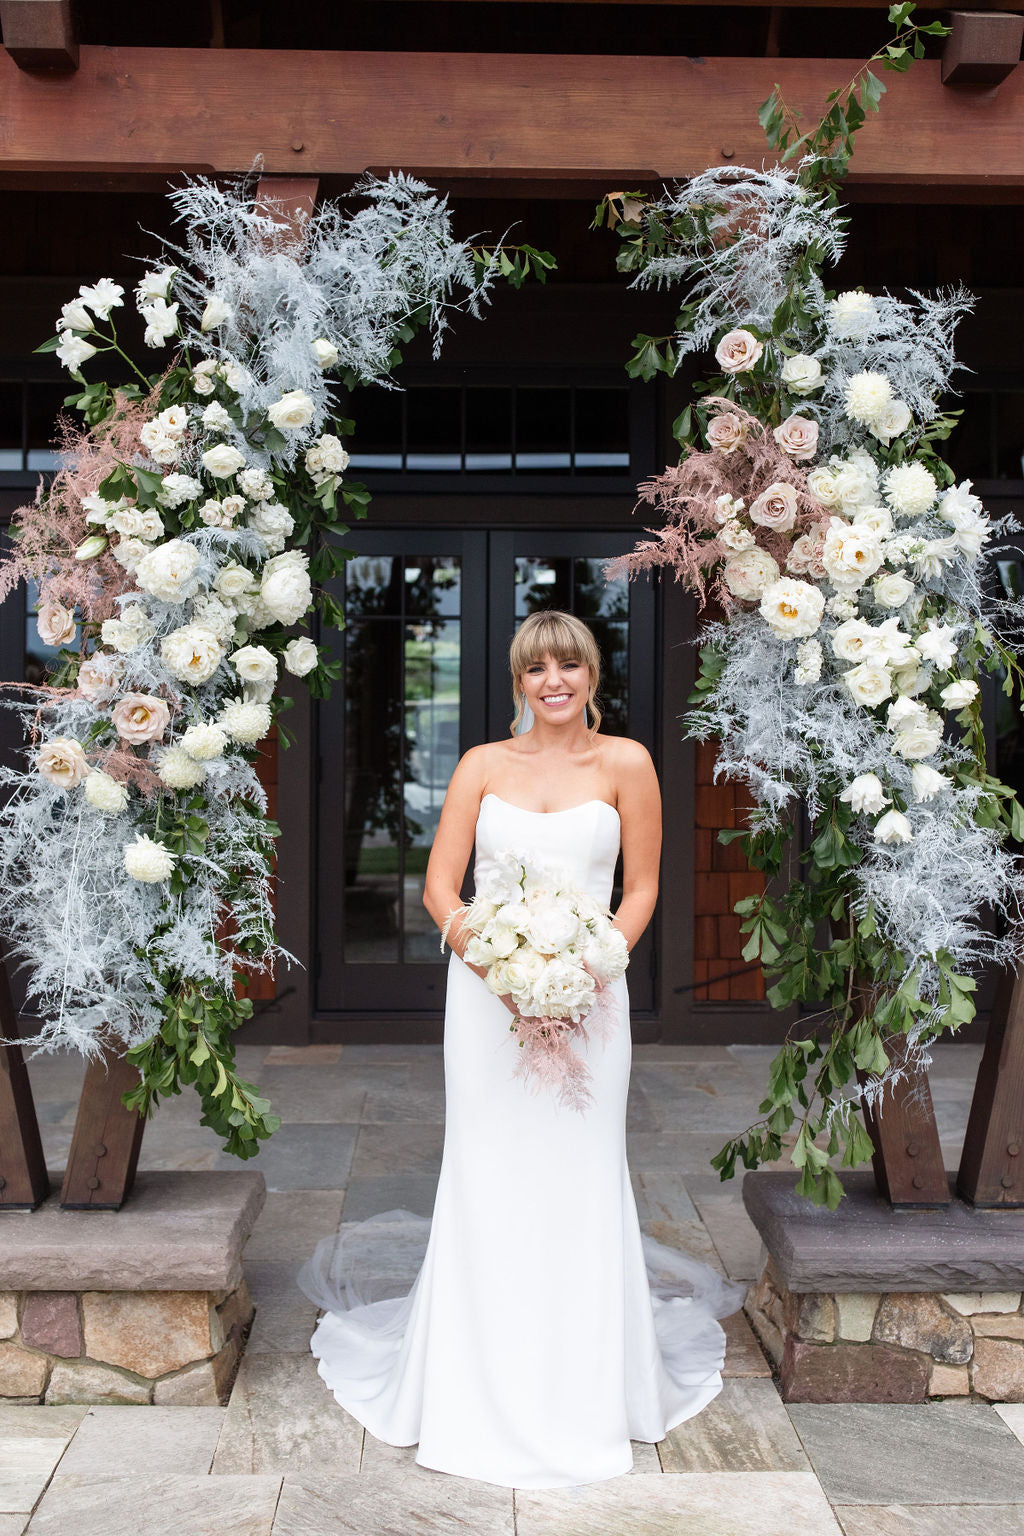 Bride in front of floral arch holding white bridal bouquet